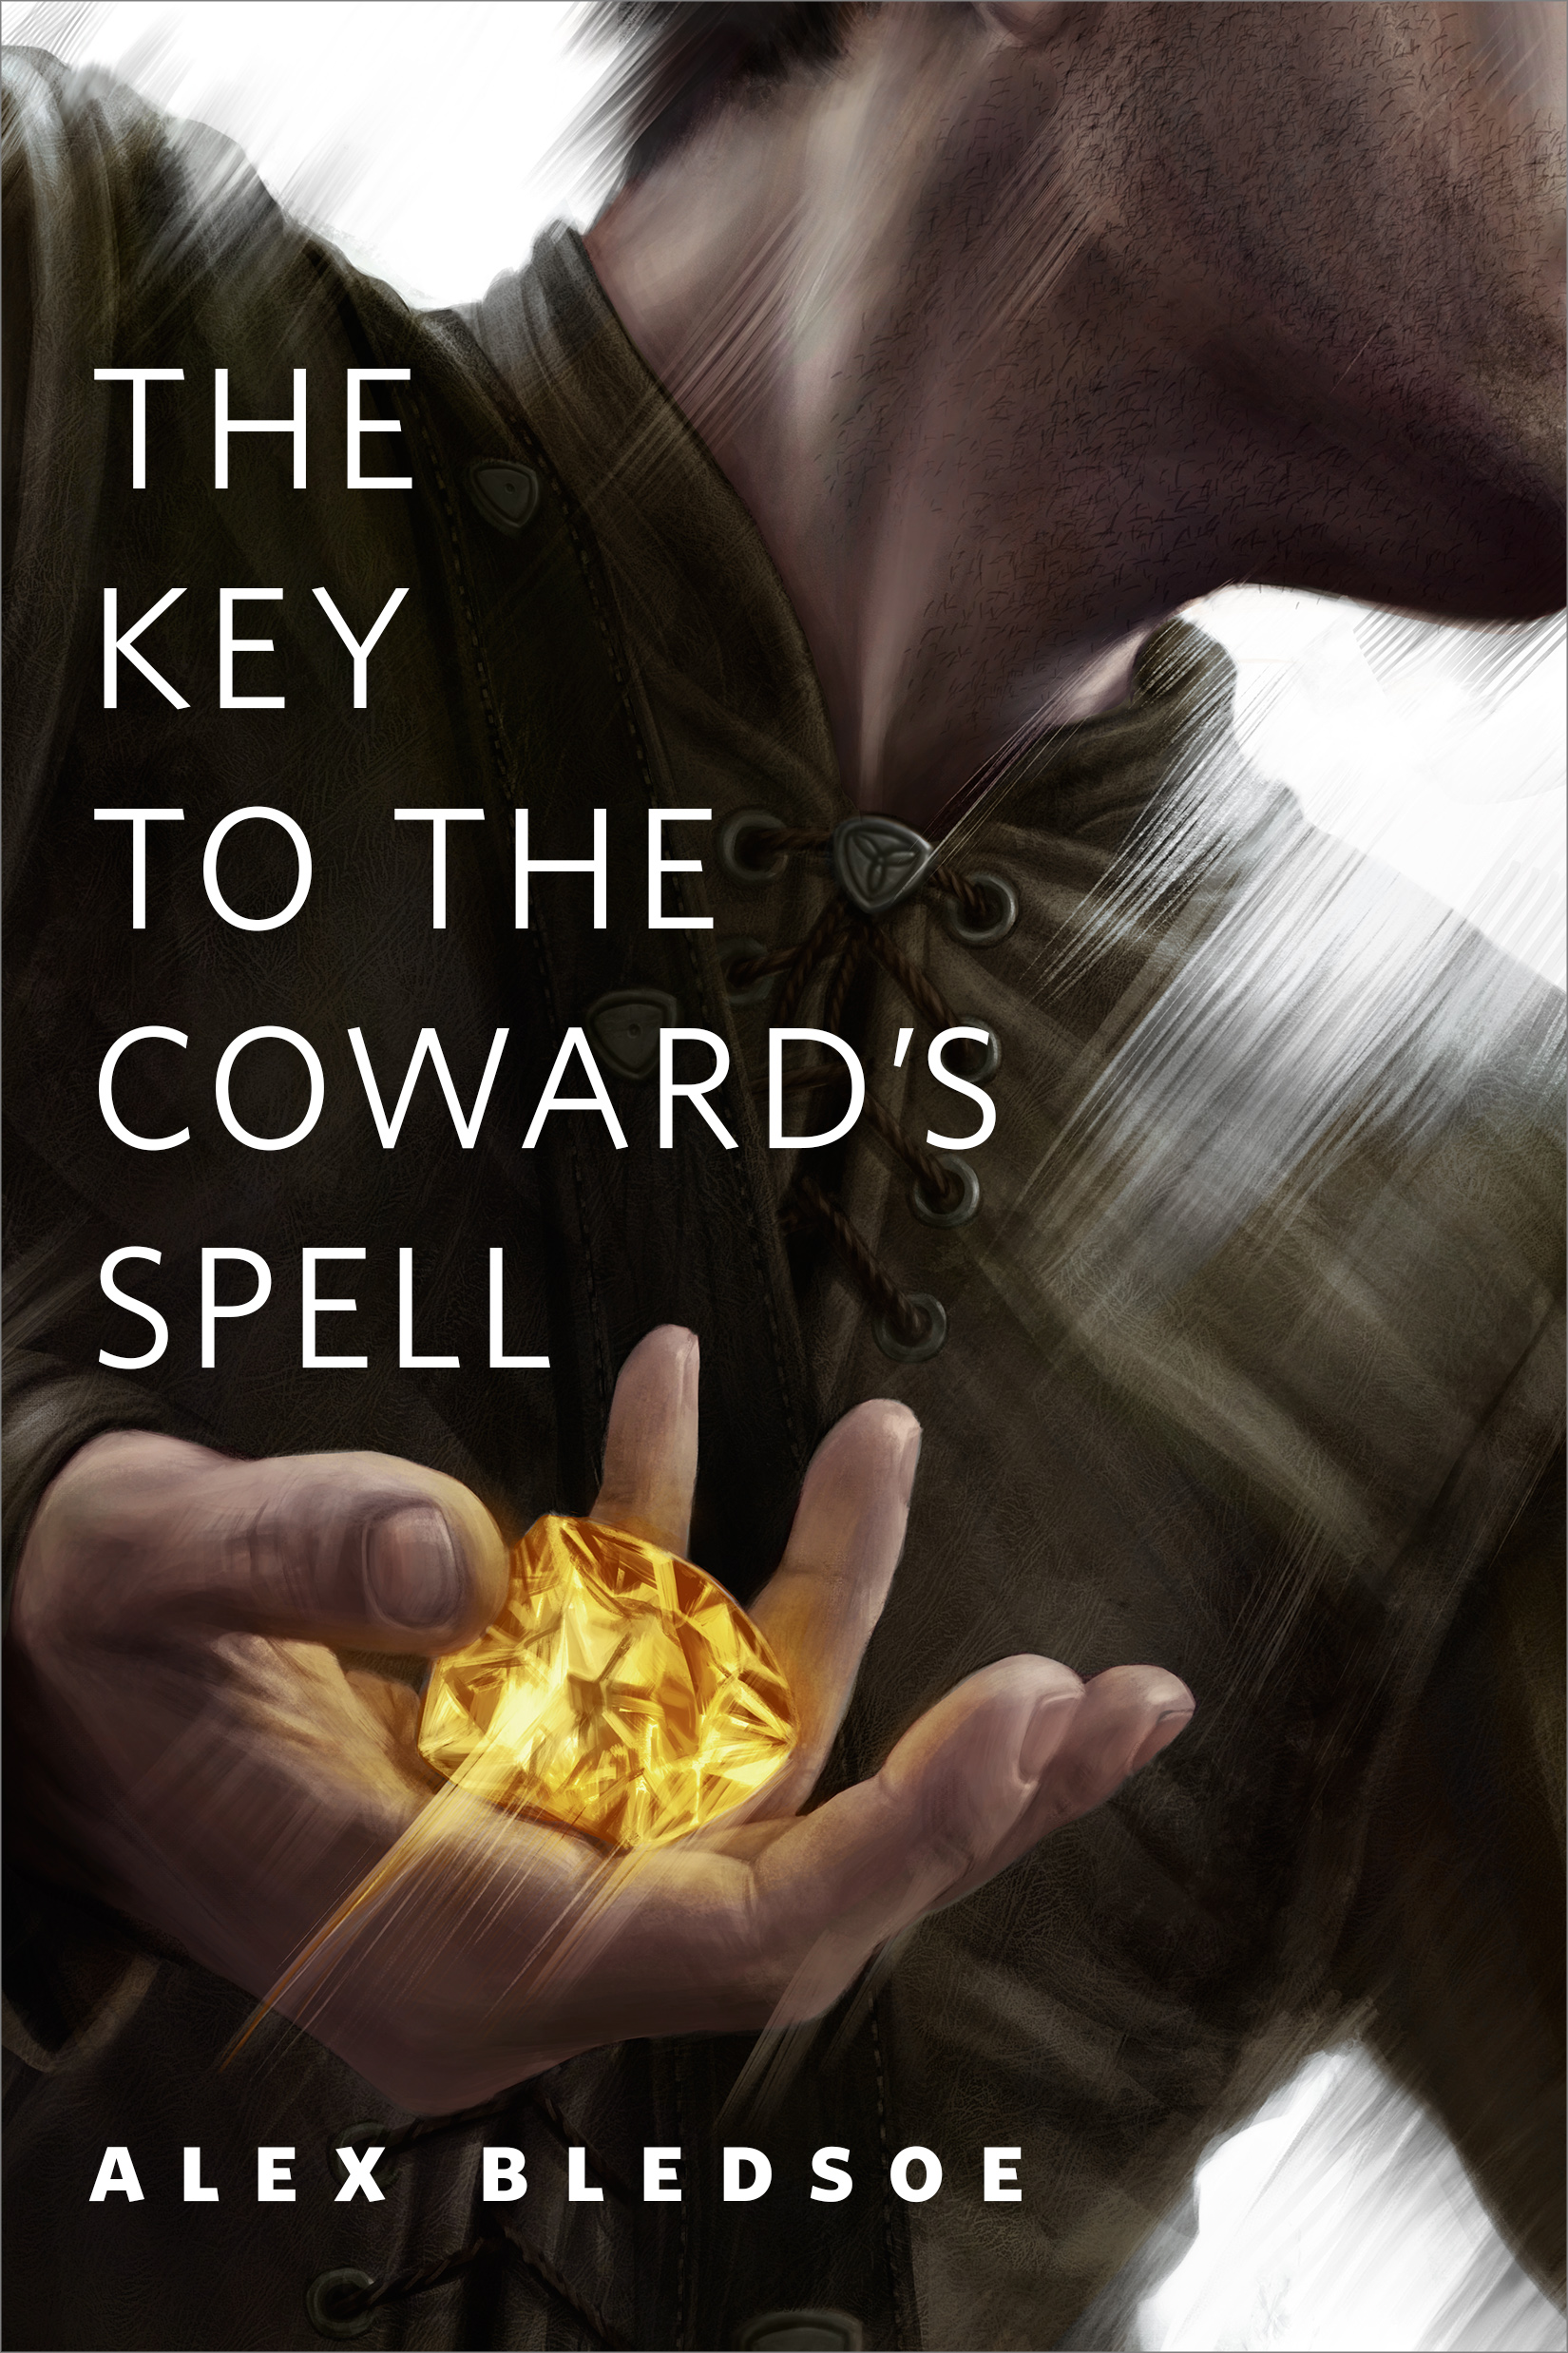 The Key to the Coward's Spell : A Tor.Com Original Eddie LaCrosse Short Story by Alex Bledsoe